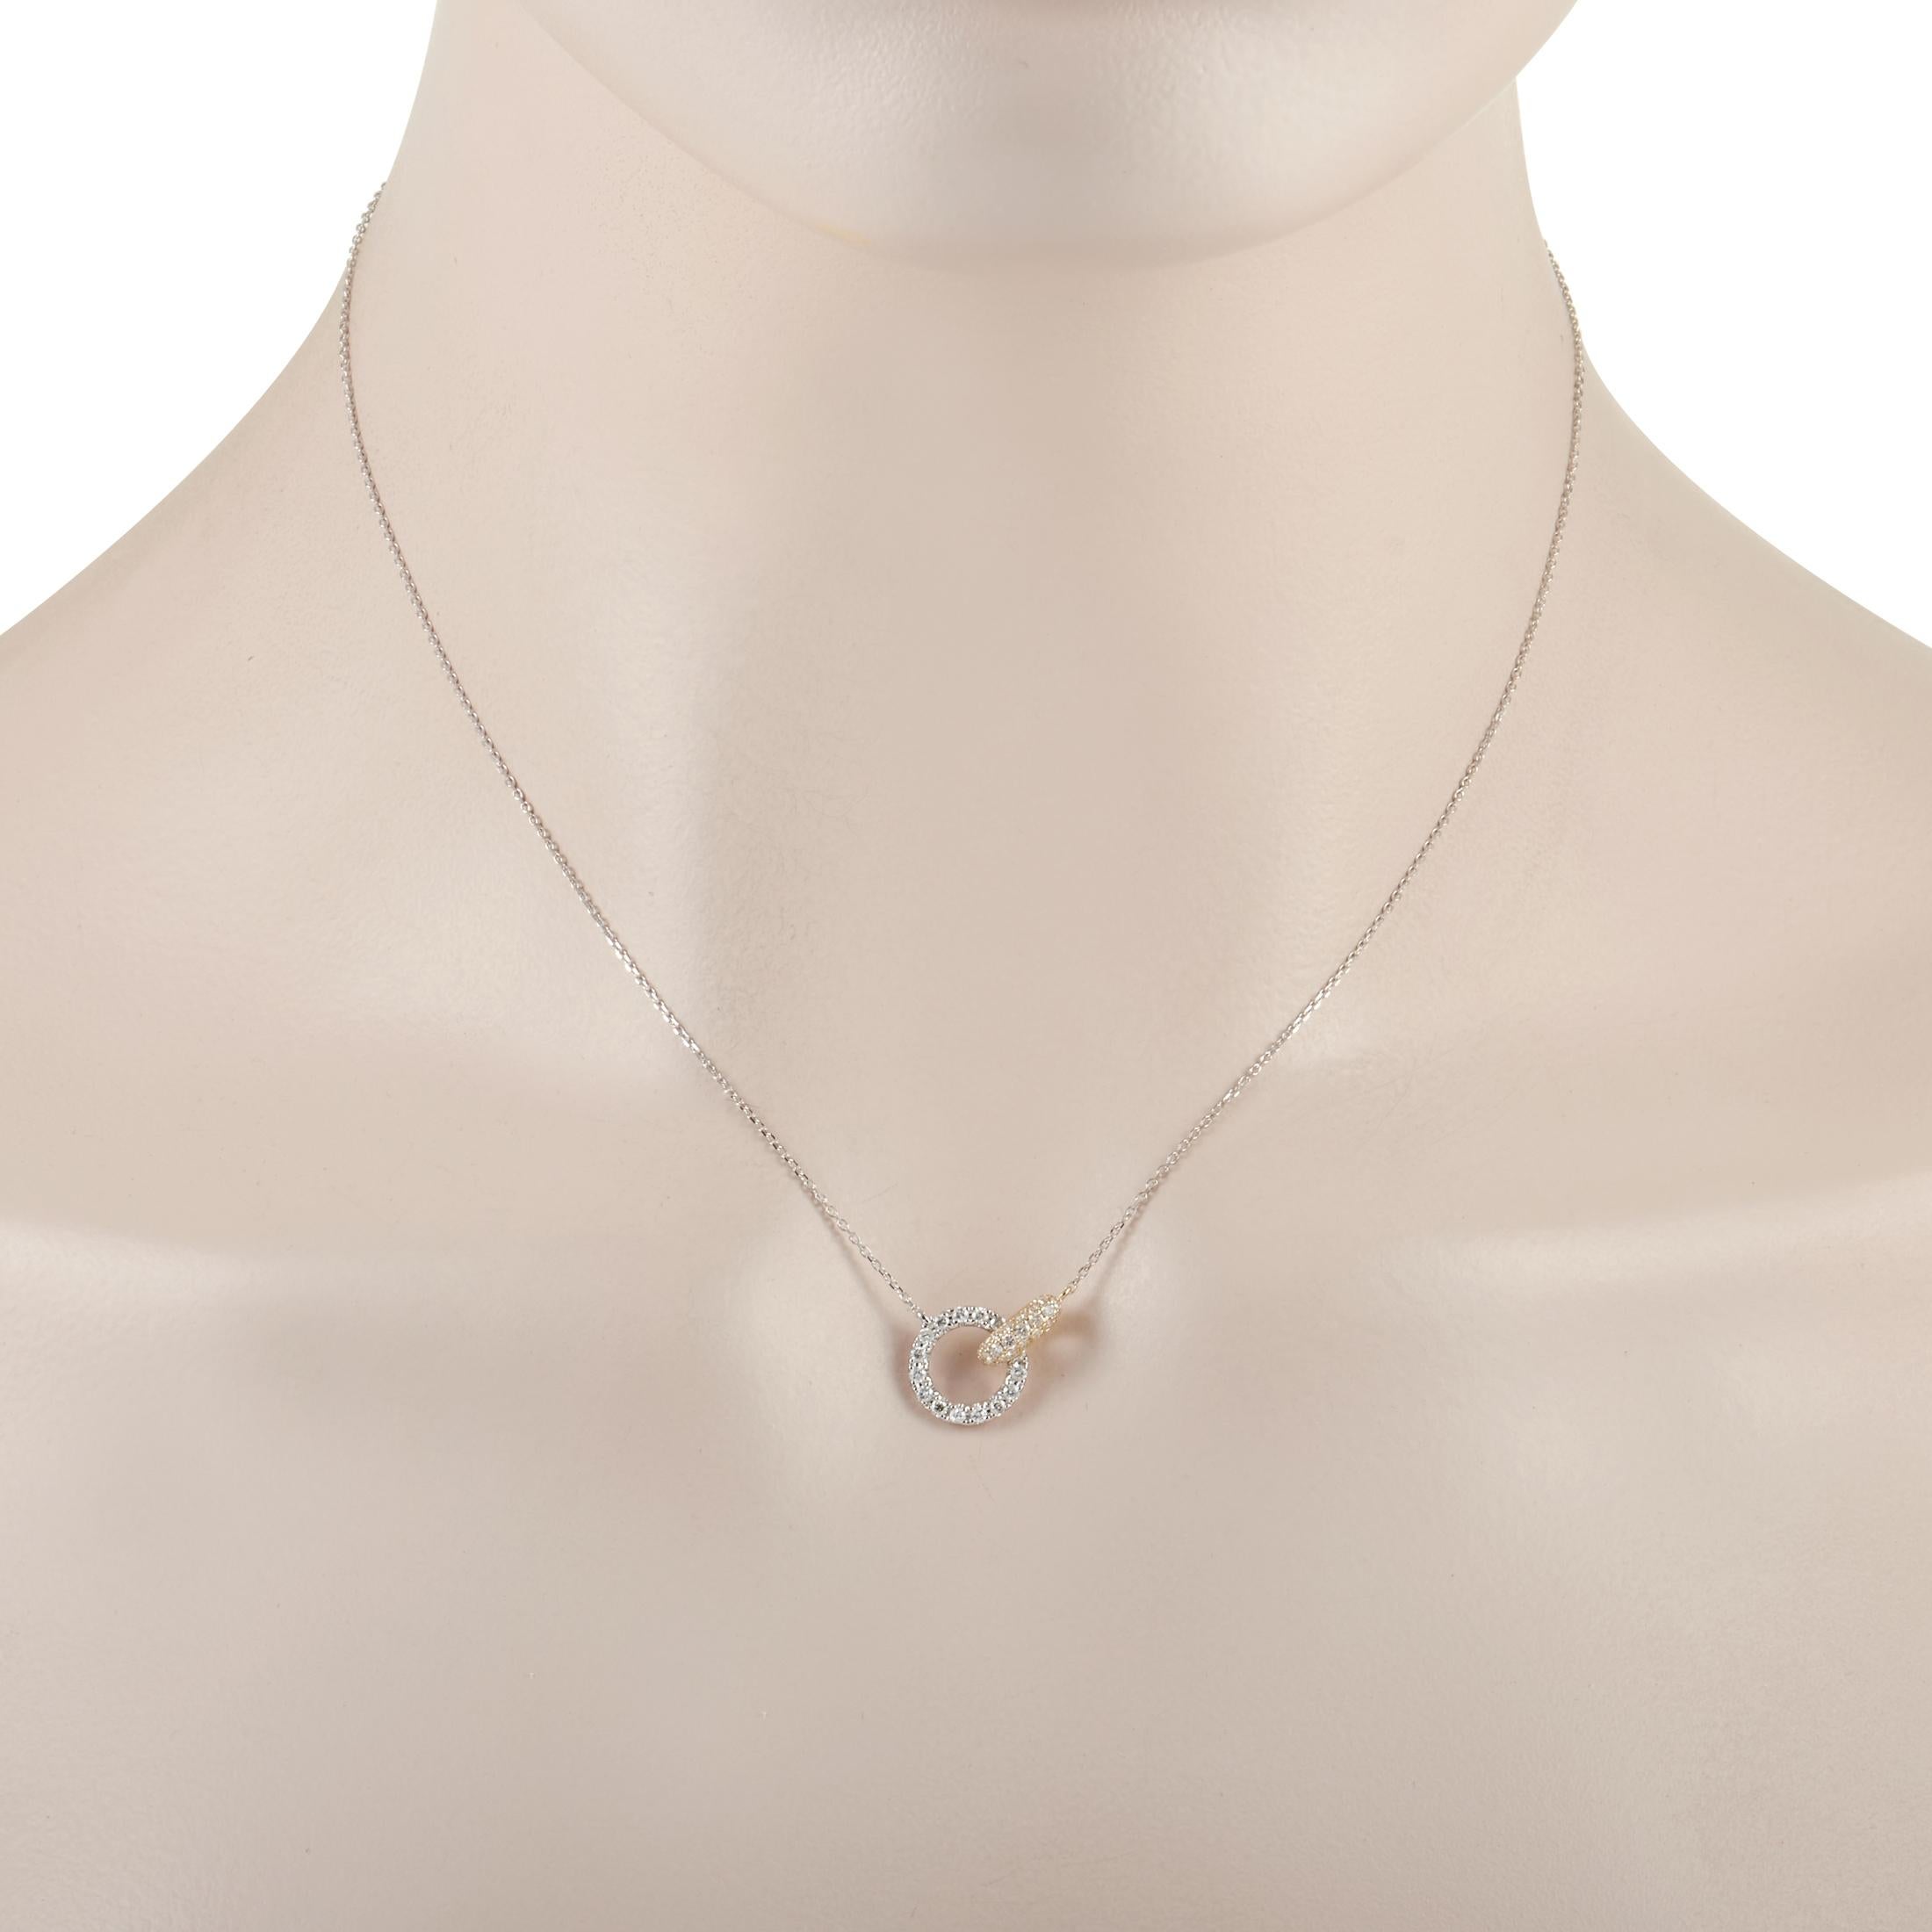 A chic sense of style makes this luxury necklace an ideal way to add opulence into your everyday. The pendant - which measures .5” long and .5” wide - features a pair of diamond encrusted rings that beautifully intertwine. 14K White Gold and 14K